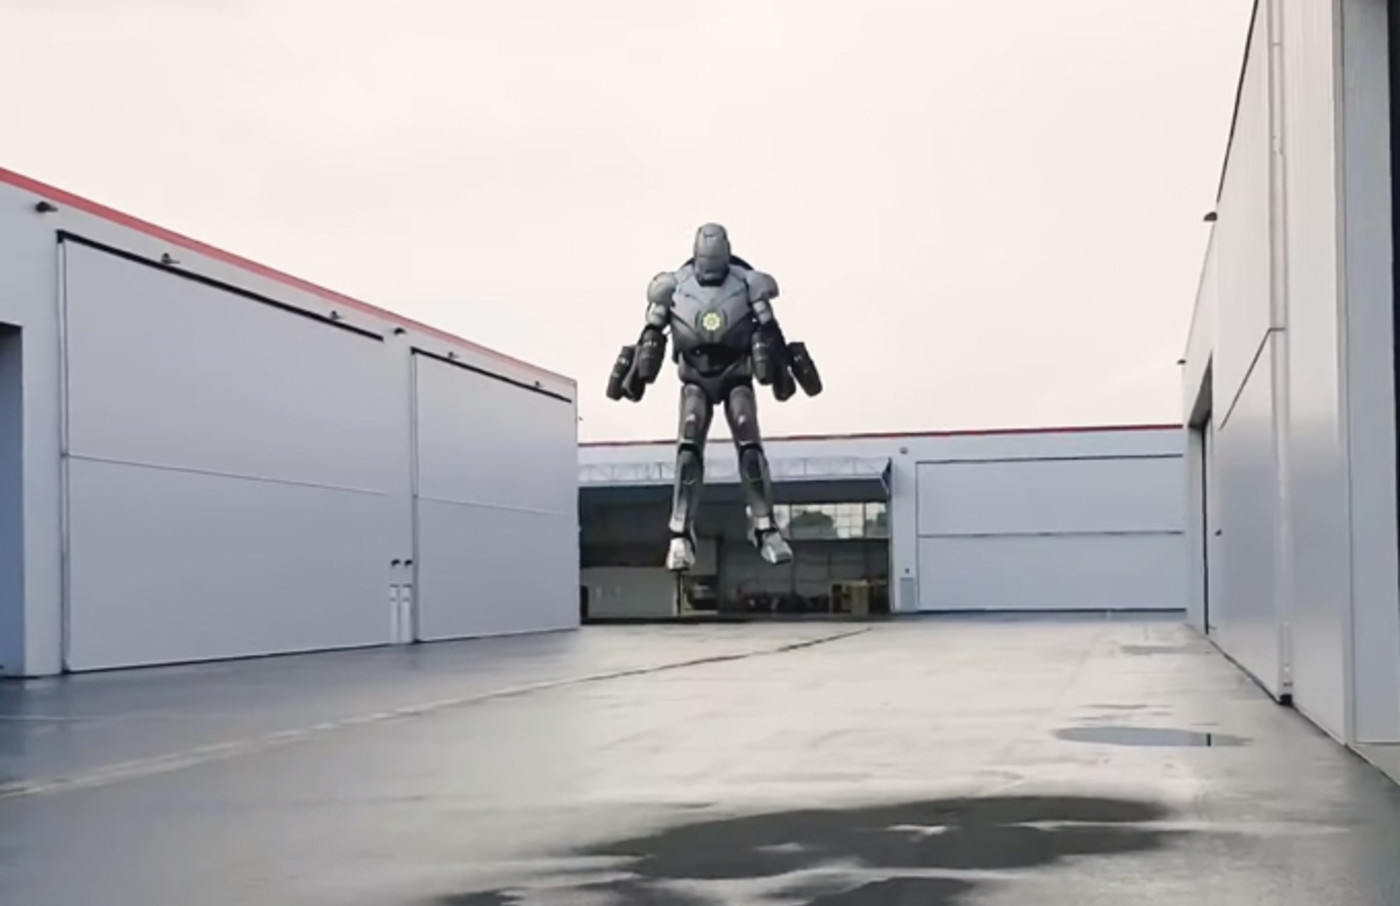 Adam Savage Built a Real Iron Man Suit That Actually Works